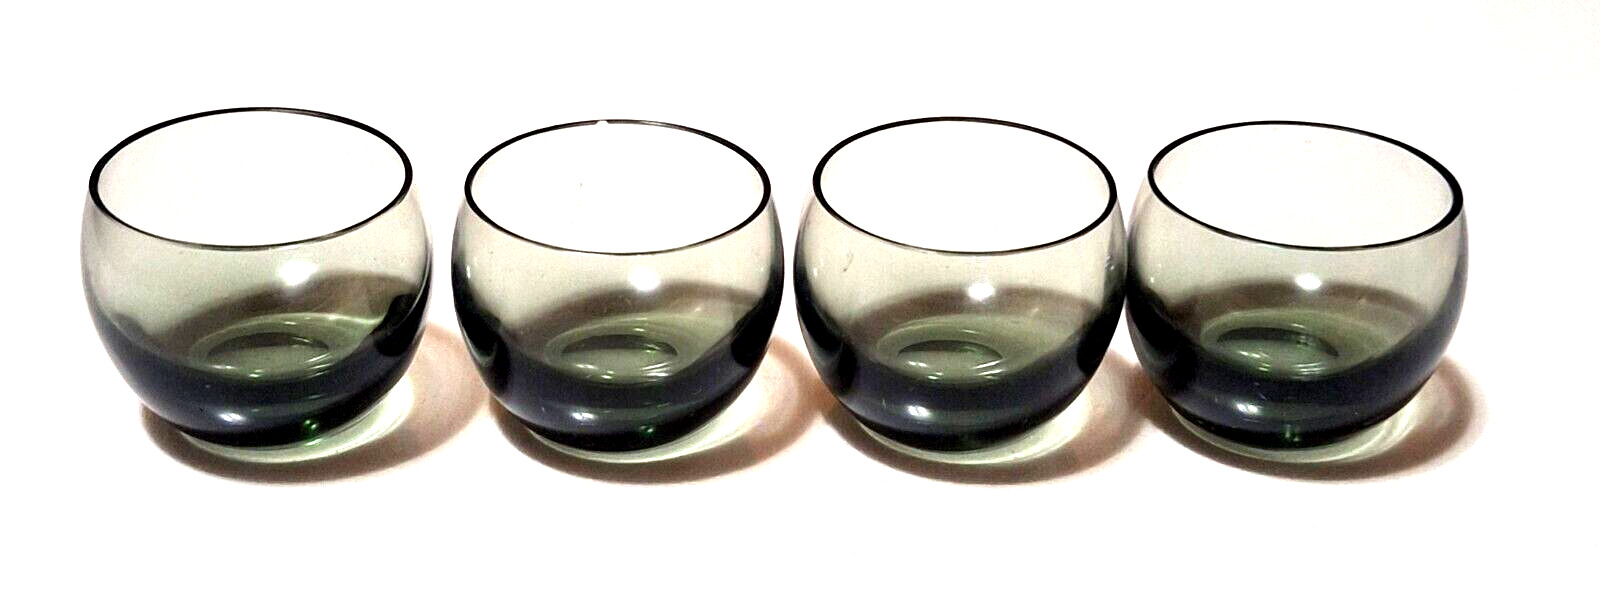 Vintage Smoke Gray Glass Shooters Roly Poly Shot Glasses - Lot of 4